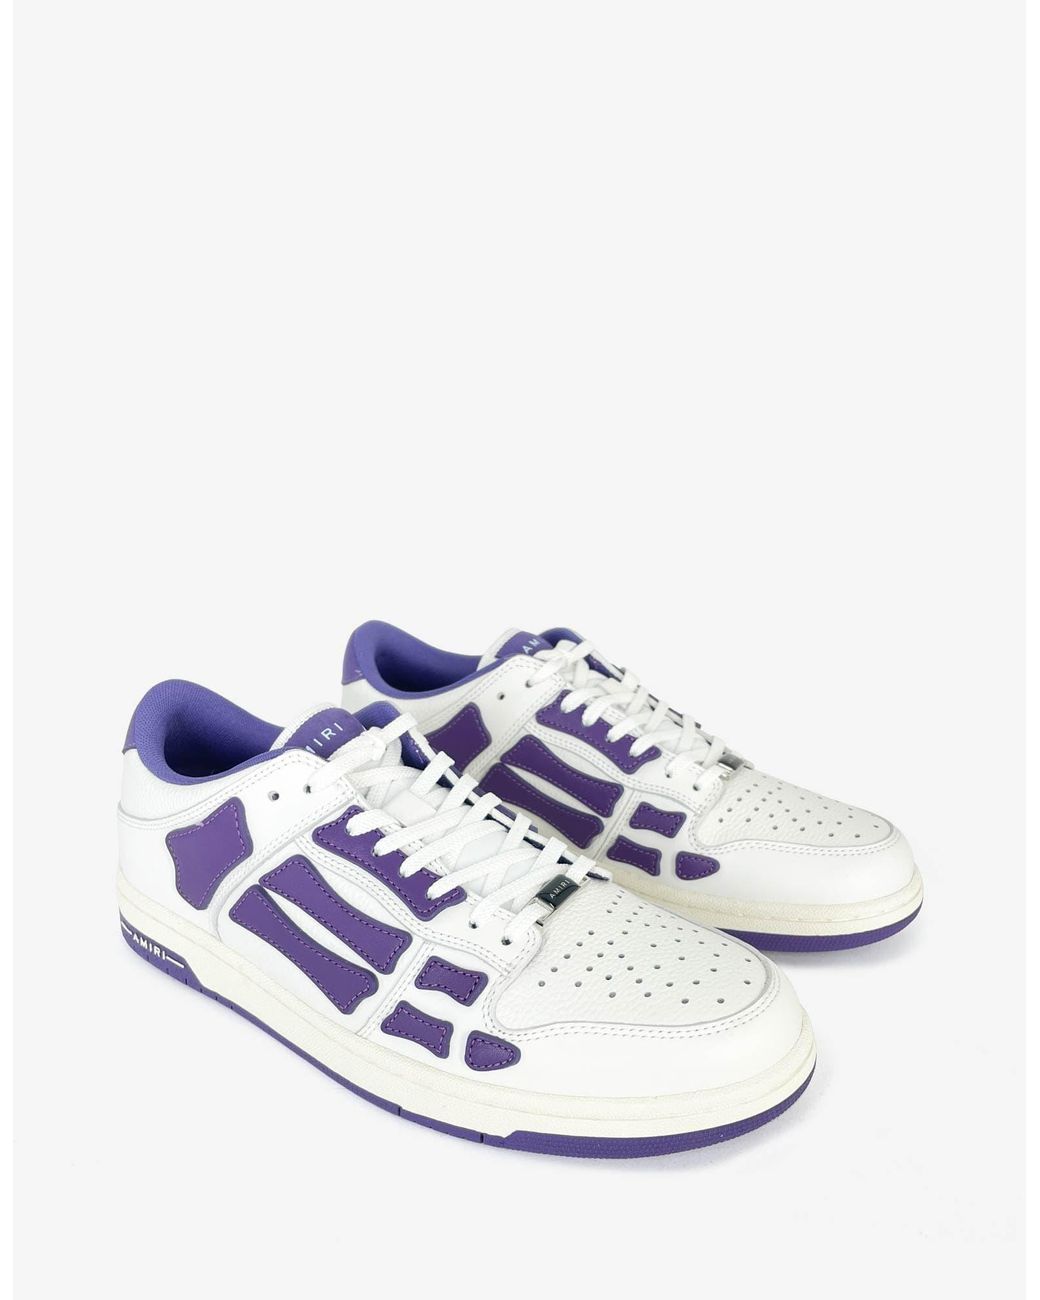 Amiri Leather Skel Top Low White & Purple Trainers for Men | Lyst